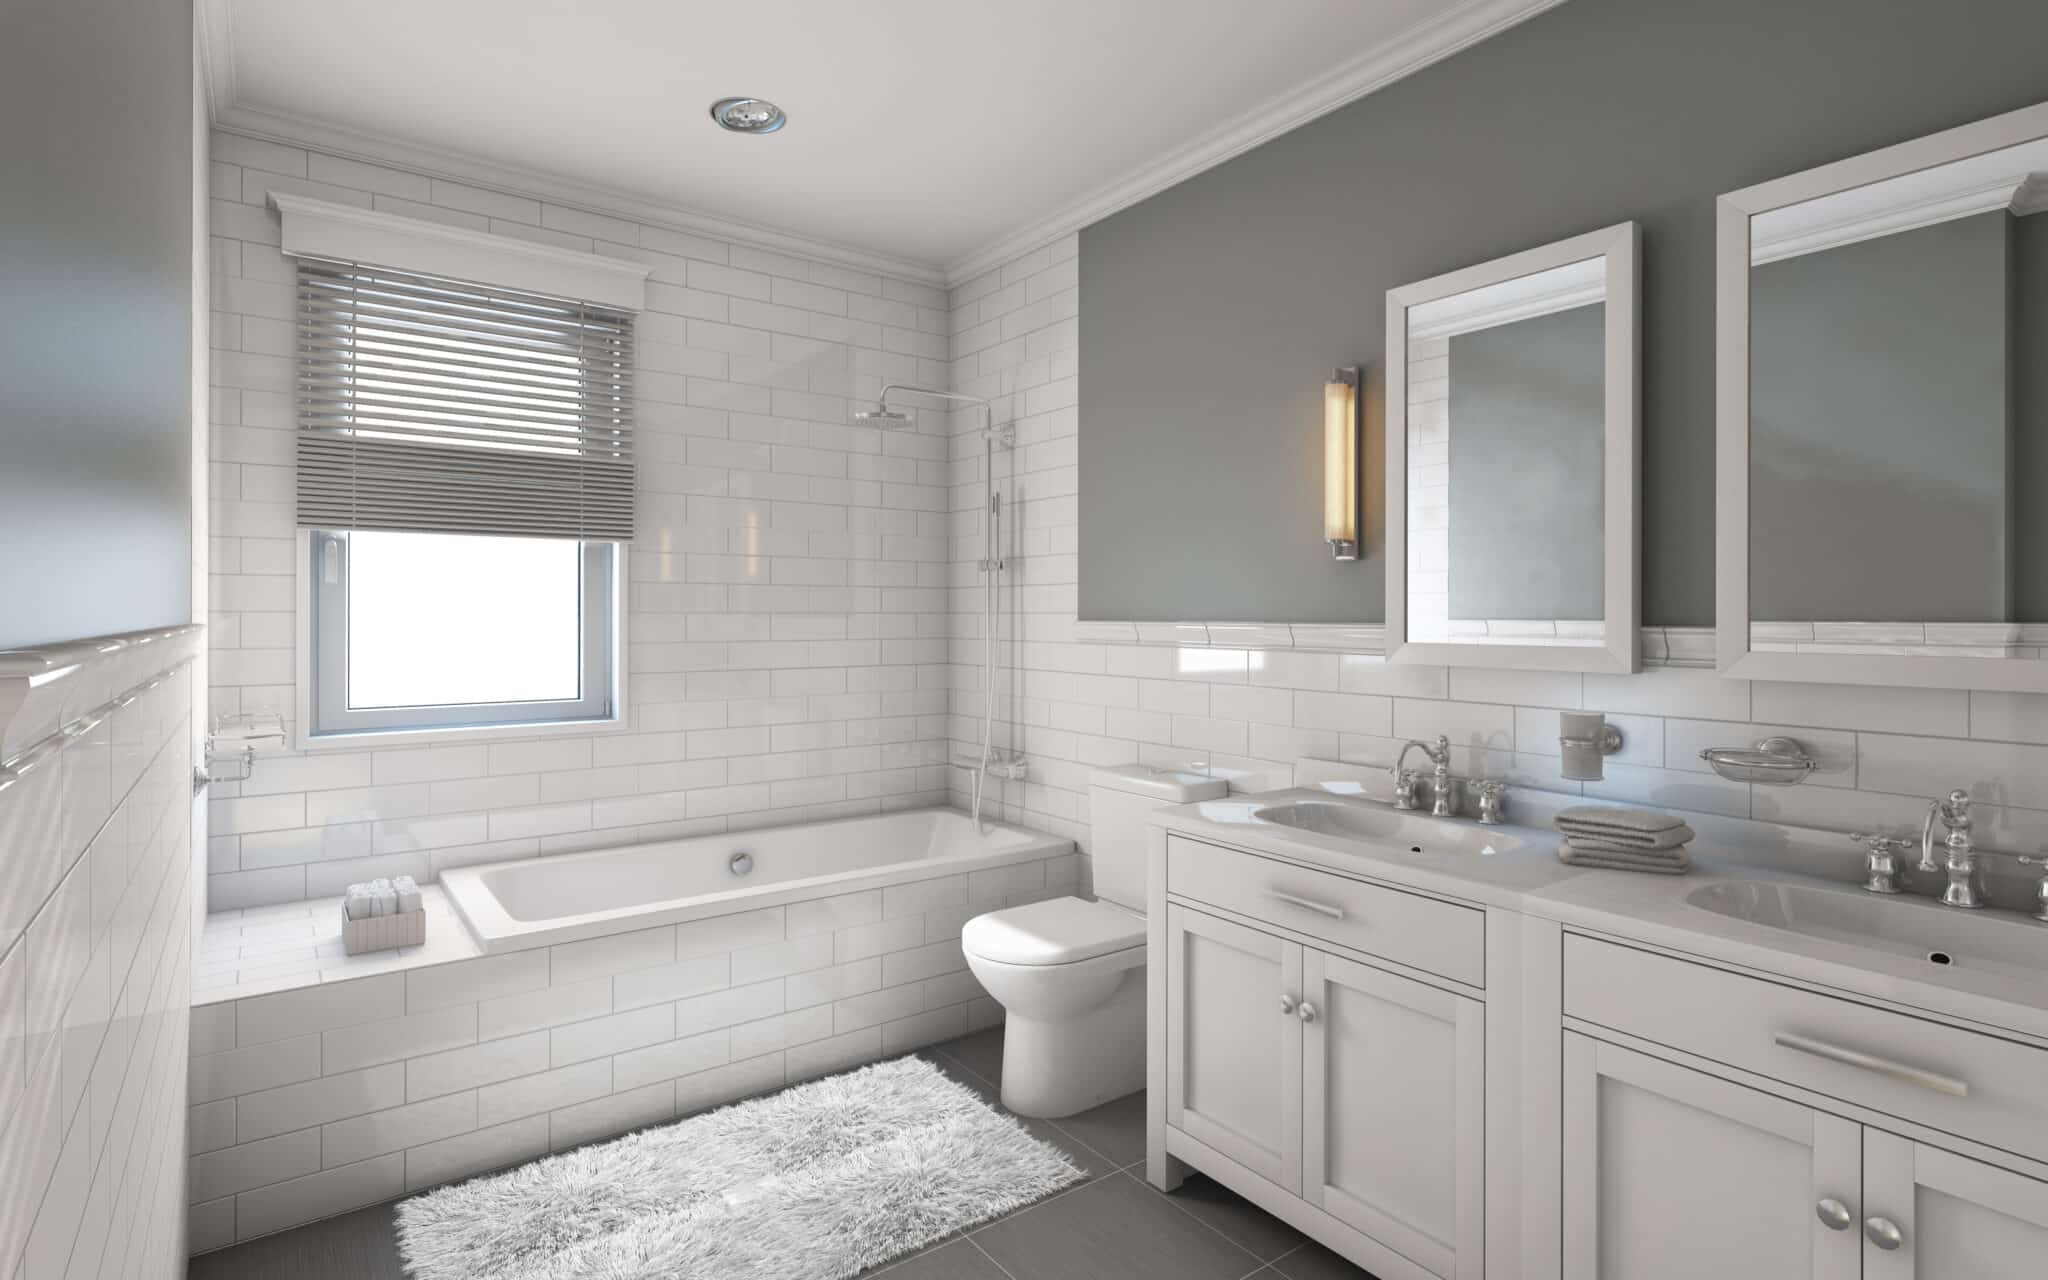 Best Materials to Use When Designing a Bathroom